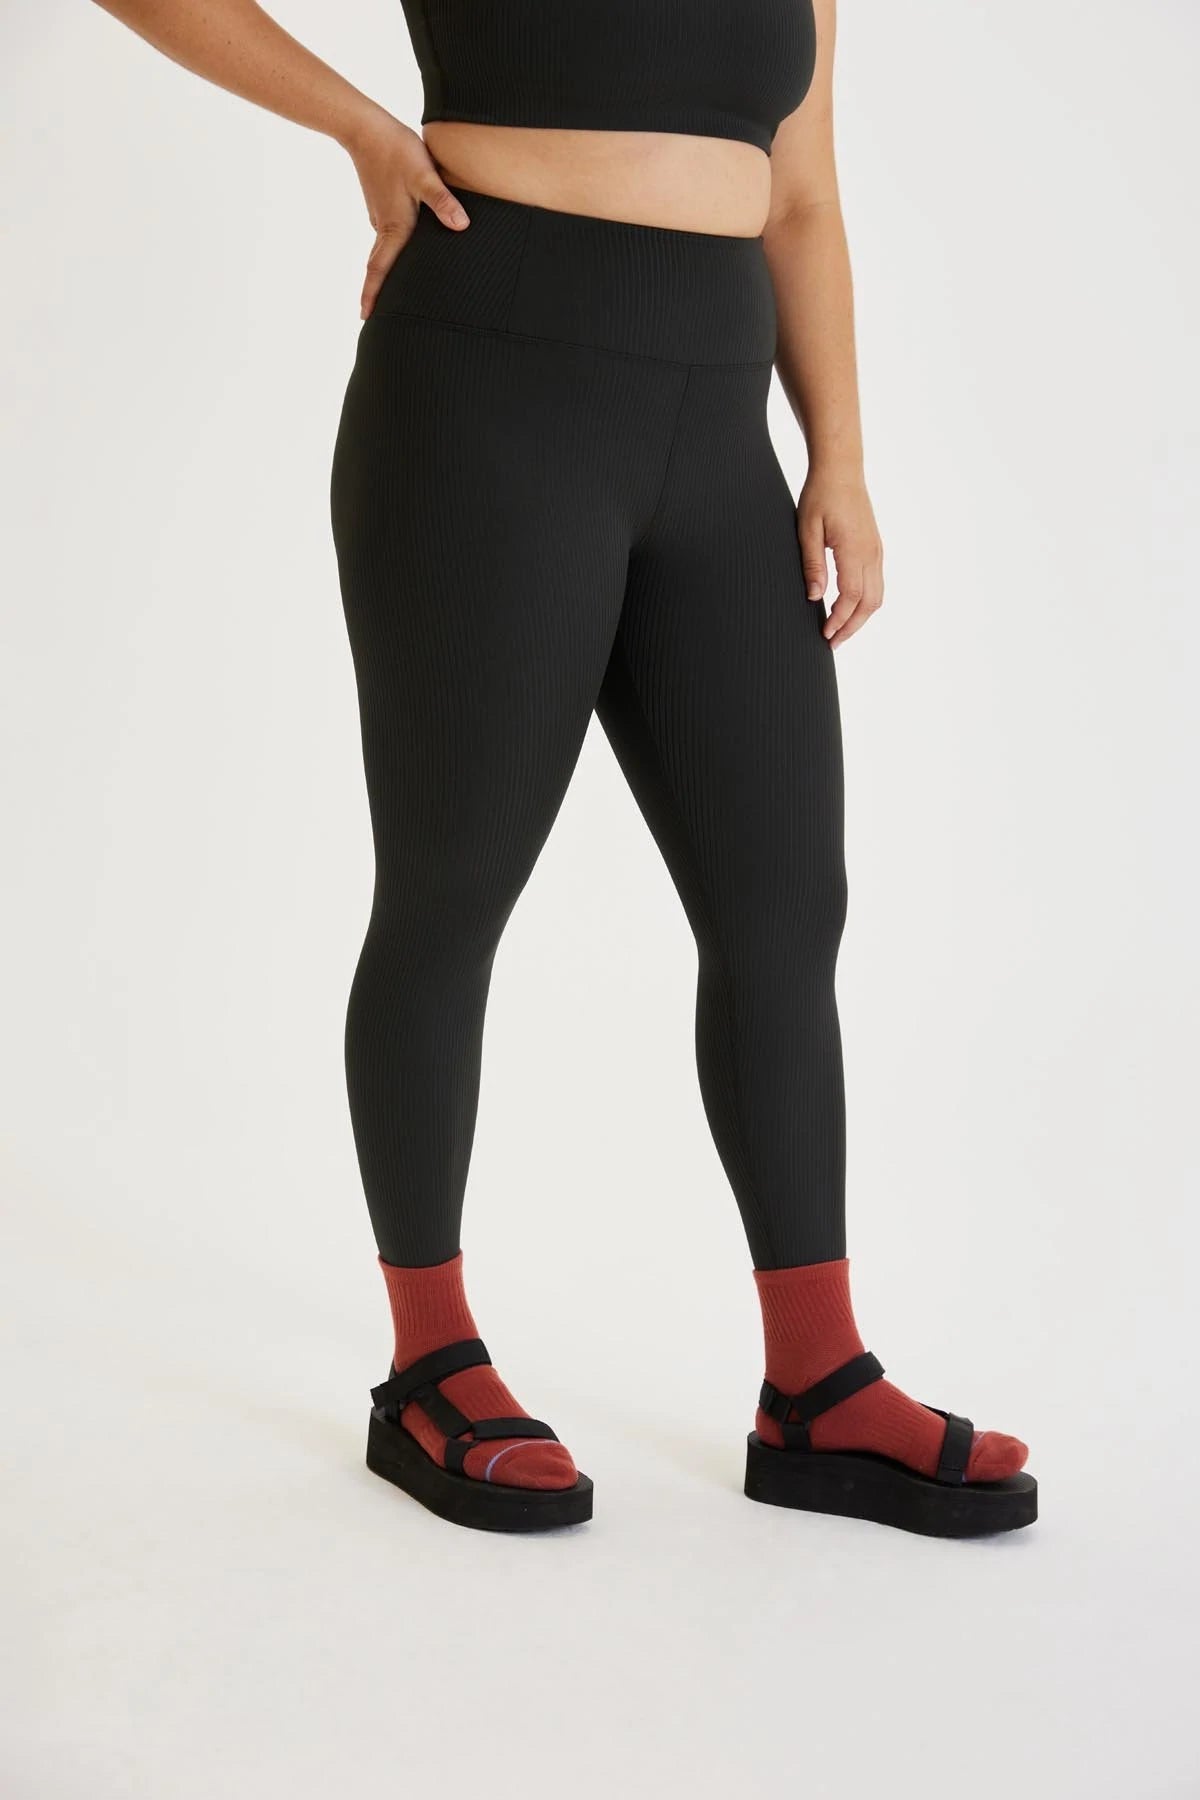 Girlfriend Collective RIB High-Rise Leggings - Made from recycled bottles Black Pants